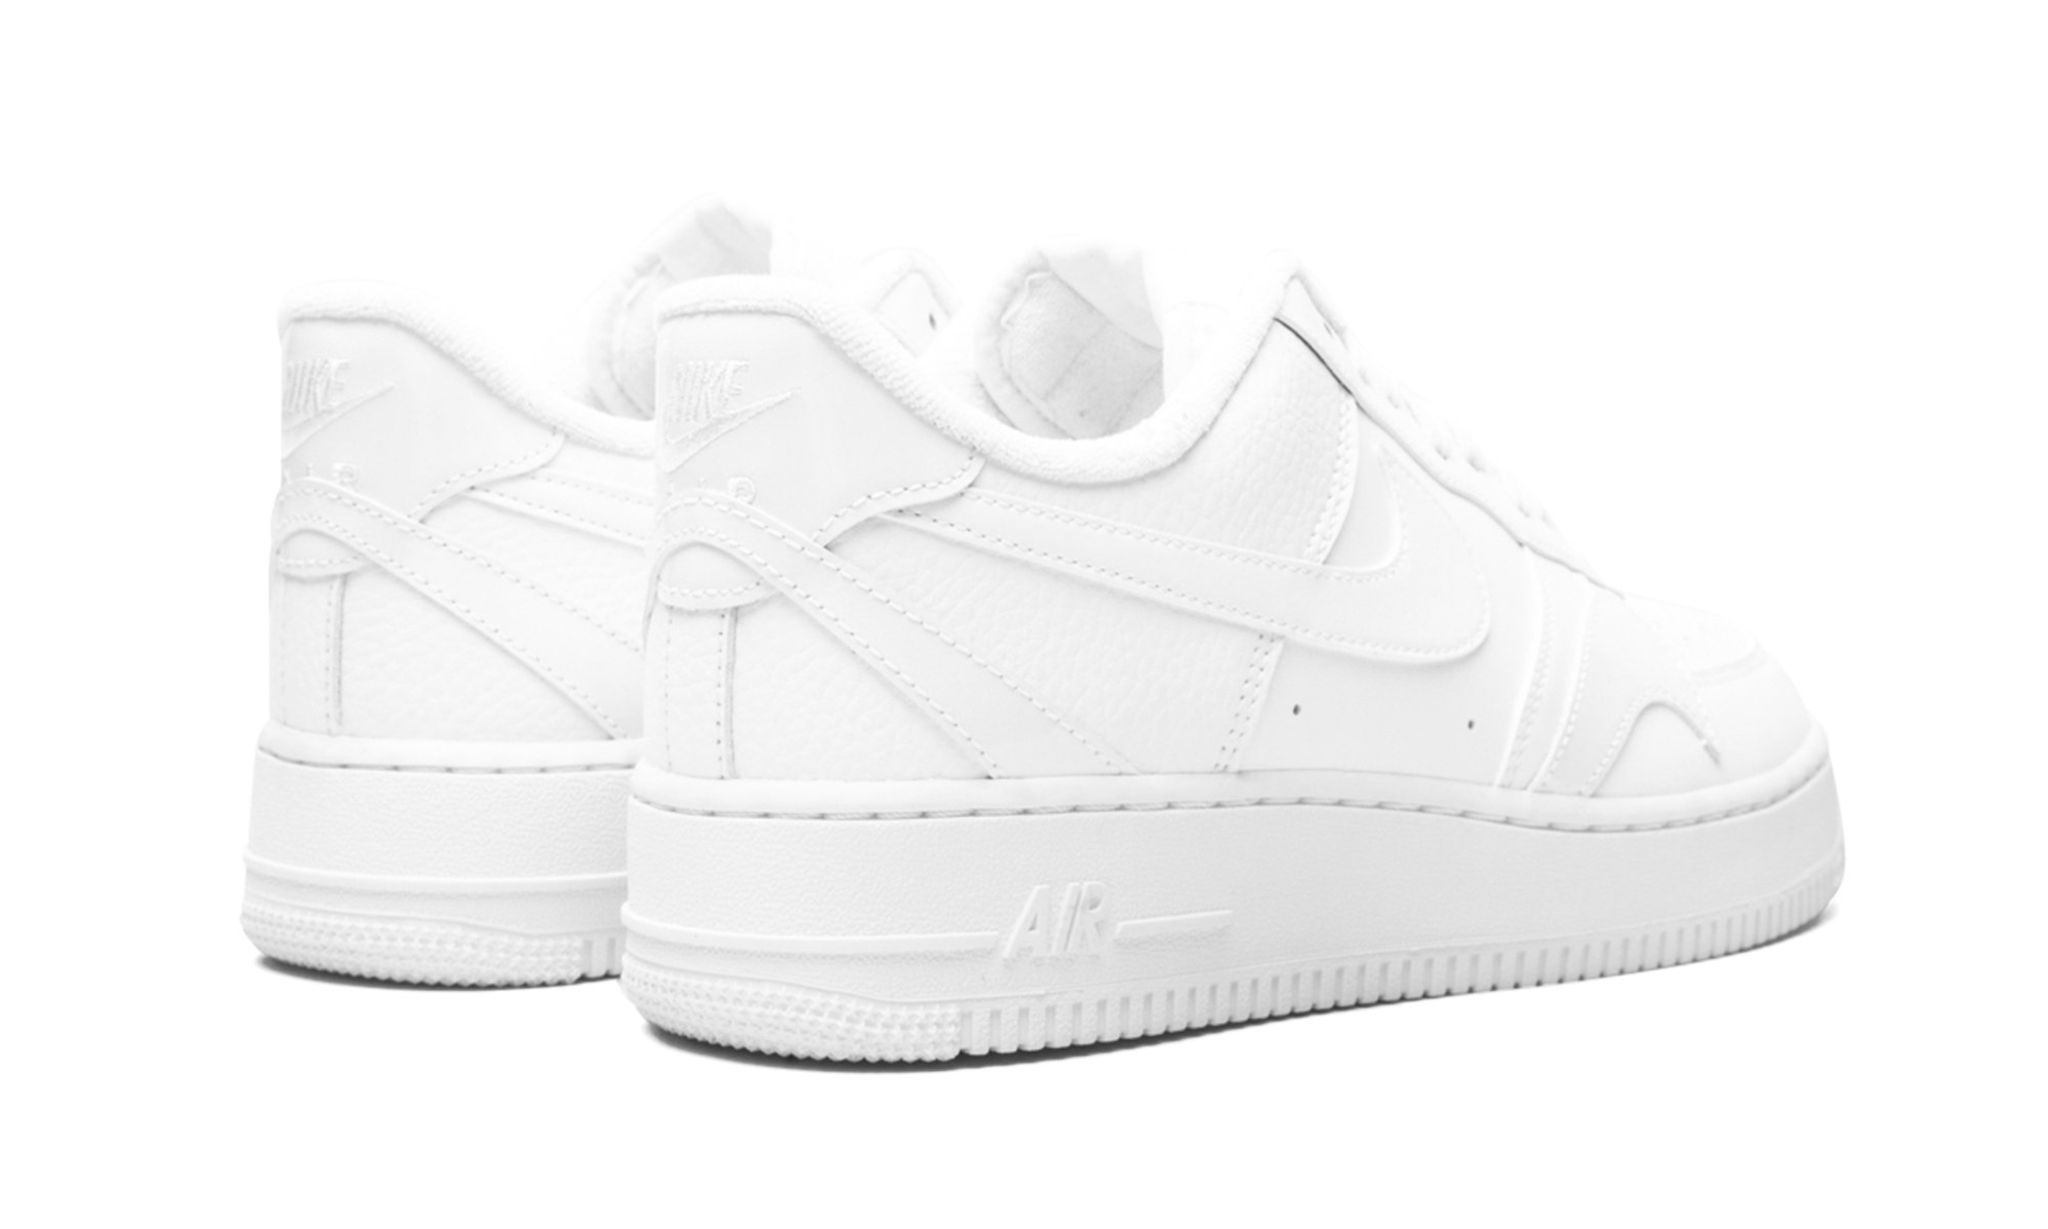 Air Force 1 '07 LV8 "Misplaced Swoosh - Triple White" - 3